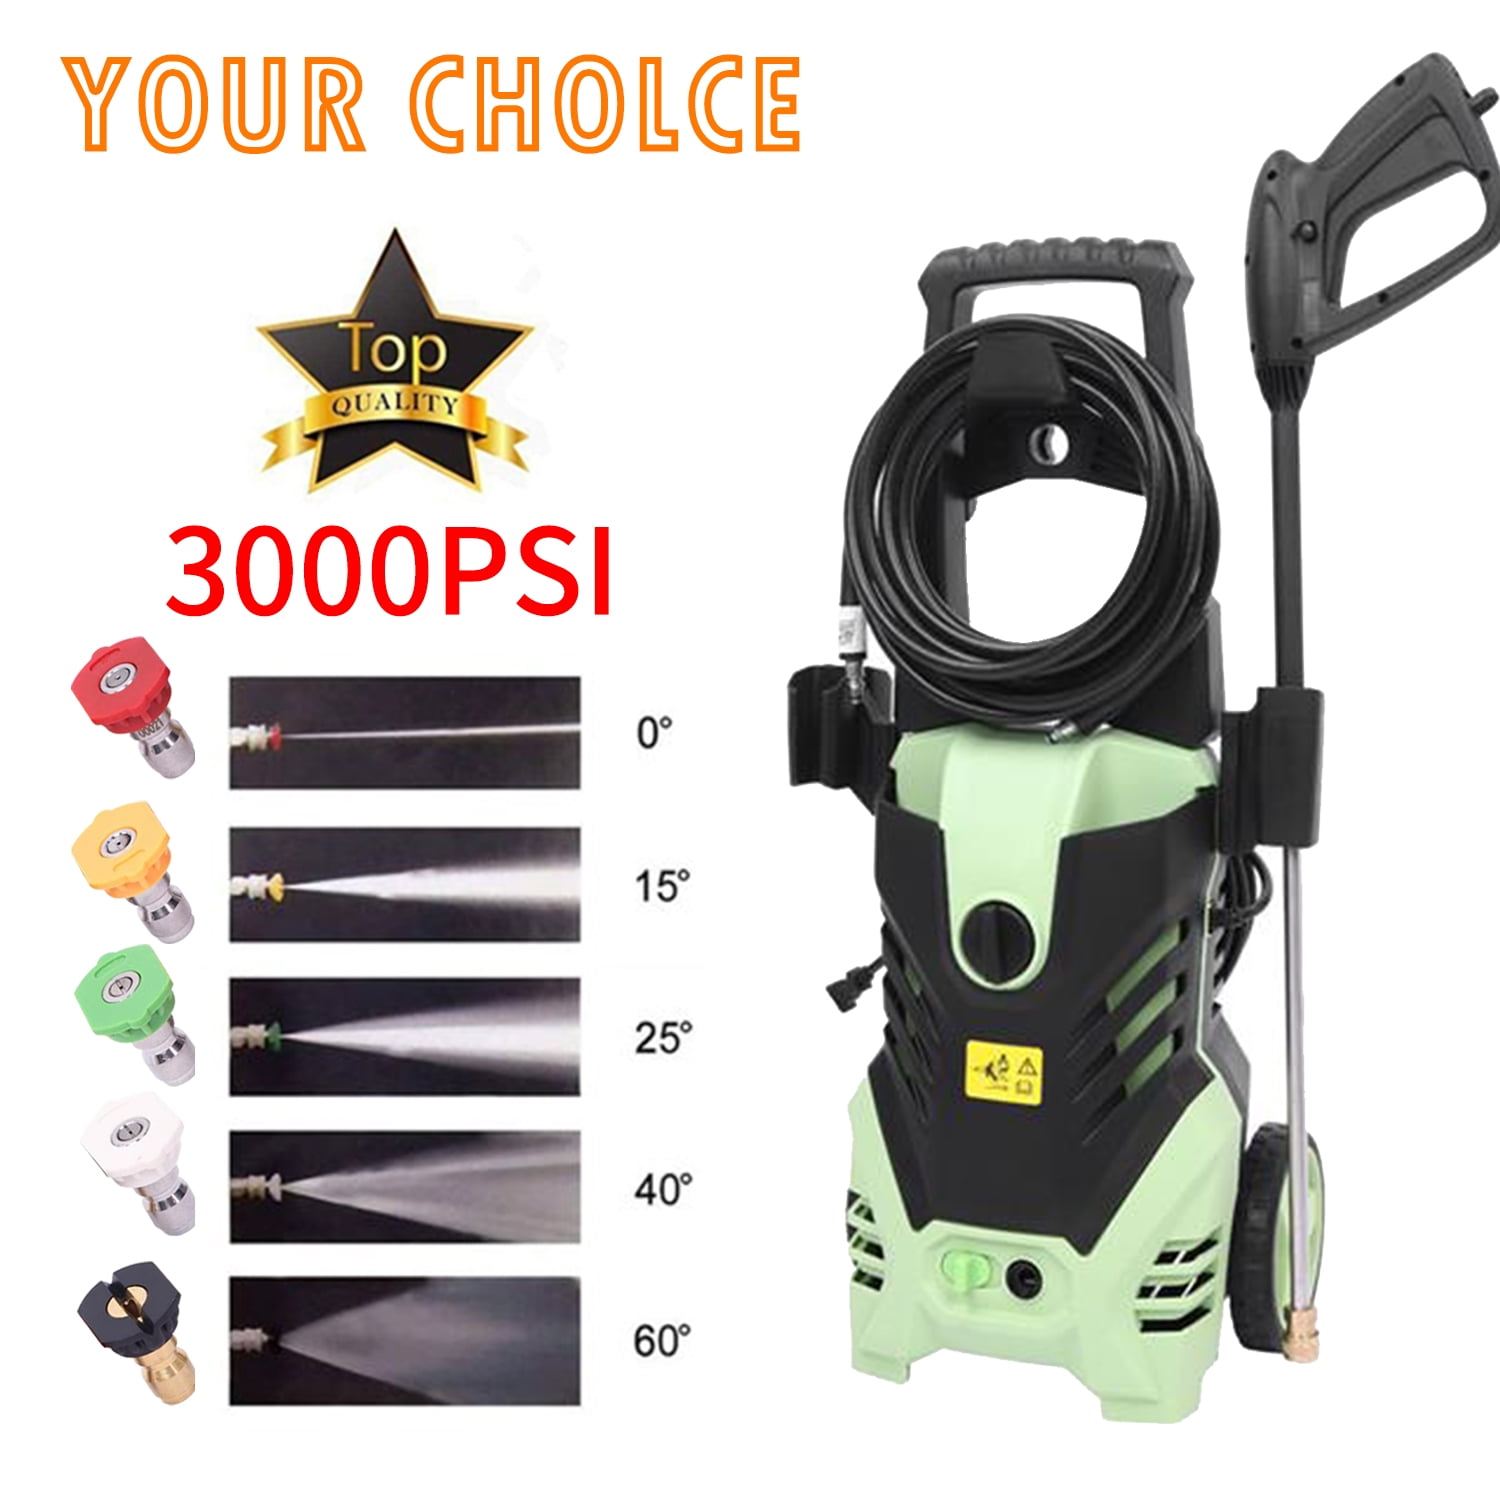 Balleen.E 3000PSI Electric Pressure Washer 1.7GPM Power Washer 1800W High Pressure Washer Cleaner Machine with 5 Interchangeable Nozzle & Hose Reel, Best for Cleaning Patio,Garden,Yard,Vehicle